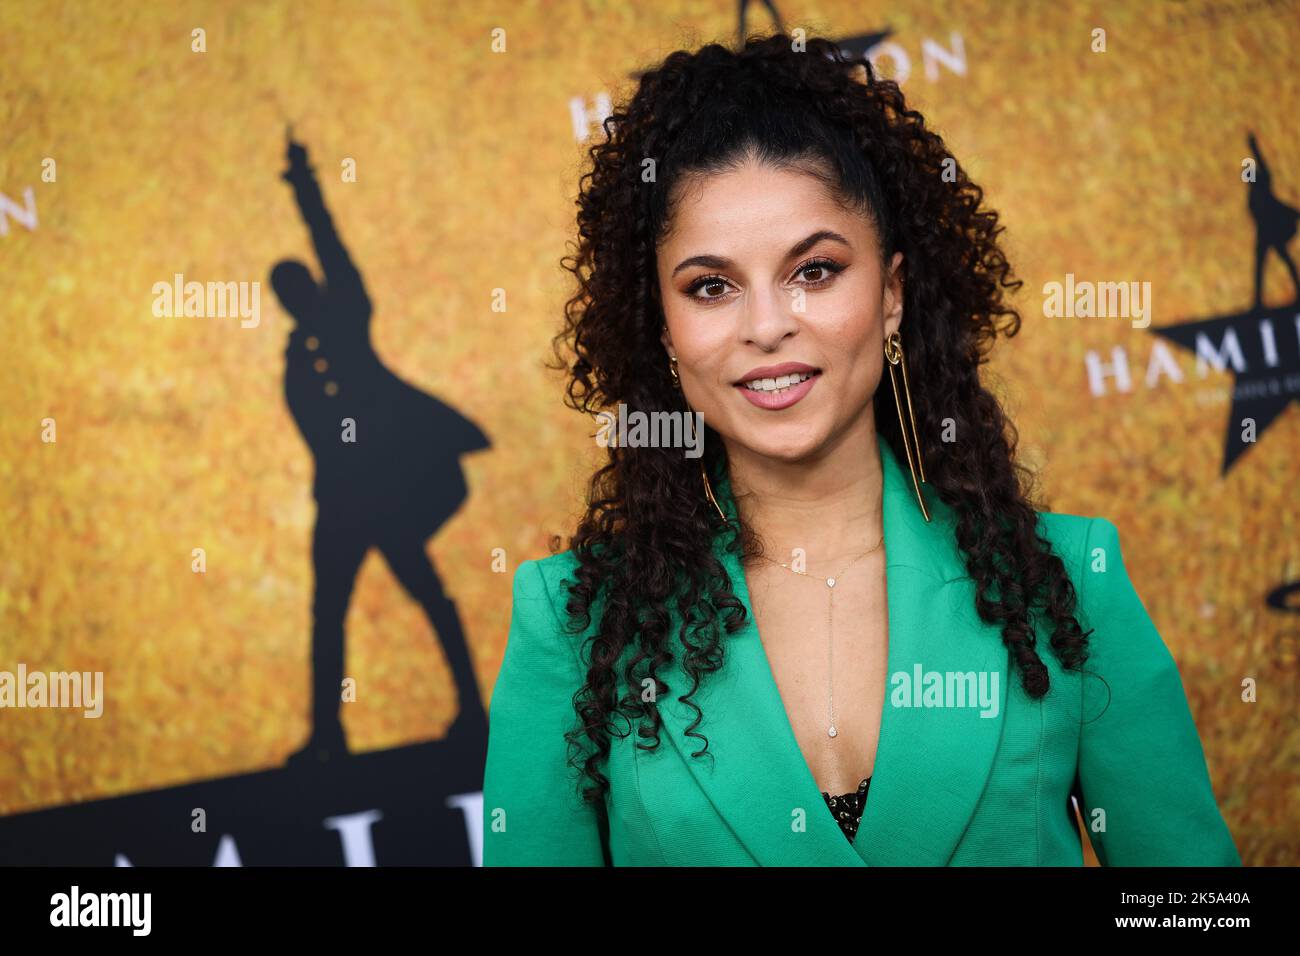 Hamburg, Germany. 06th Oct, 2022. Patricia Meeden, actress and musical performer, arrives on the red carpet for the German premiere of the musical 'Hamilton' at the Operettenhaus Hamburg. Credit: Christian Charisius/dpa/Alamy Live News Stock Photo